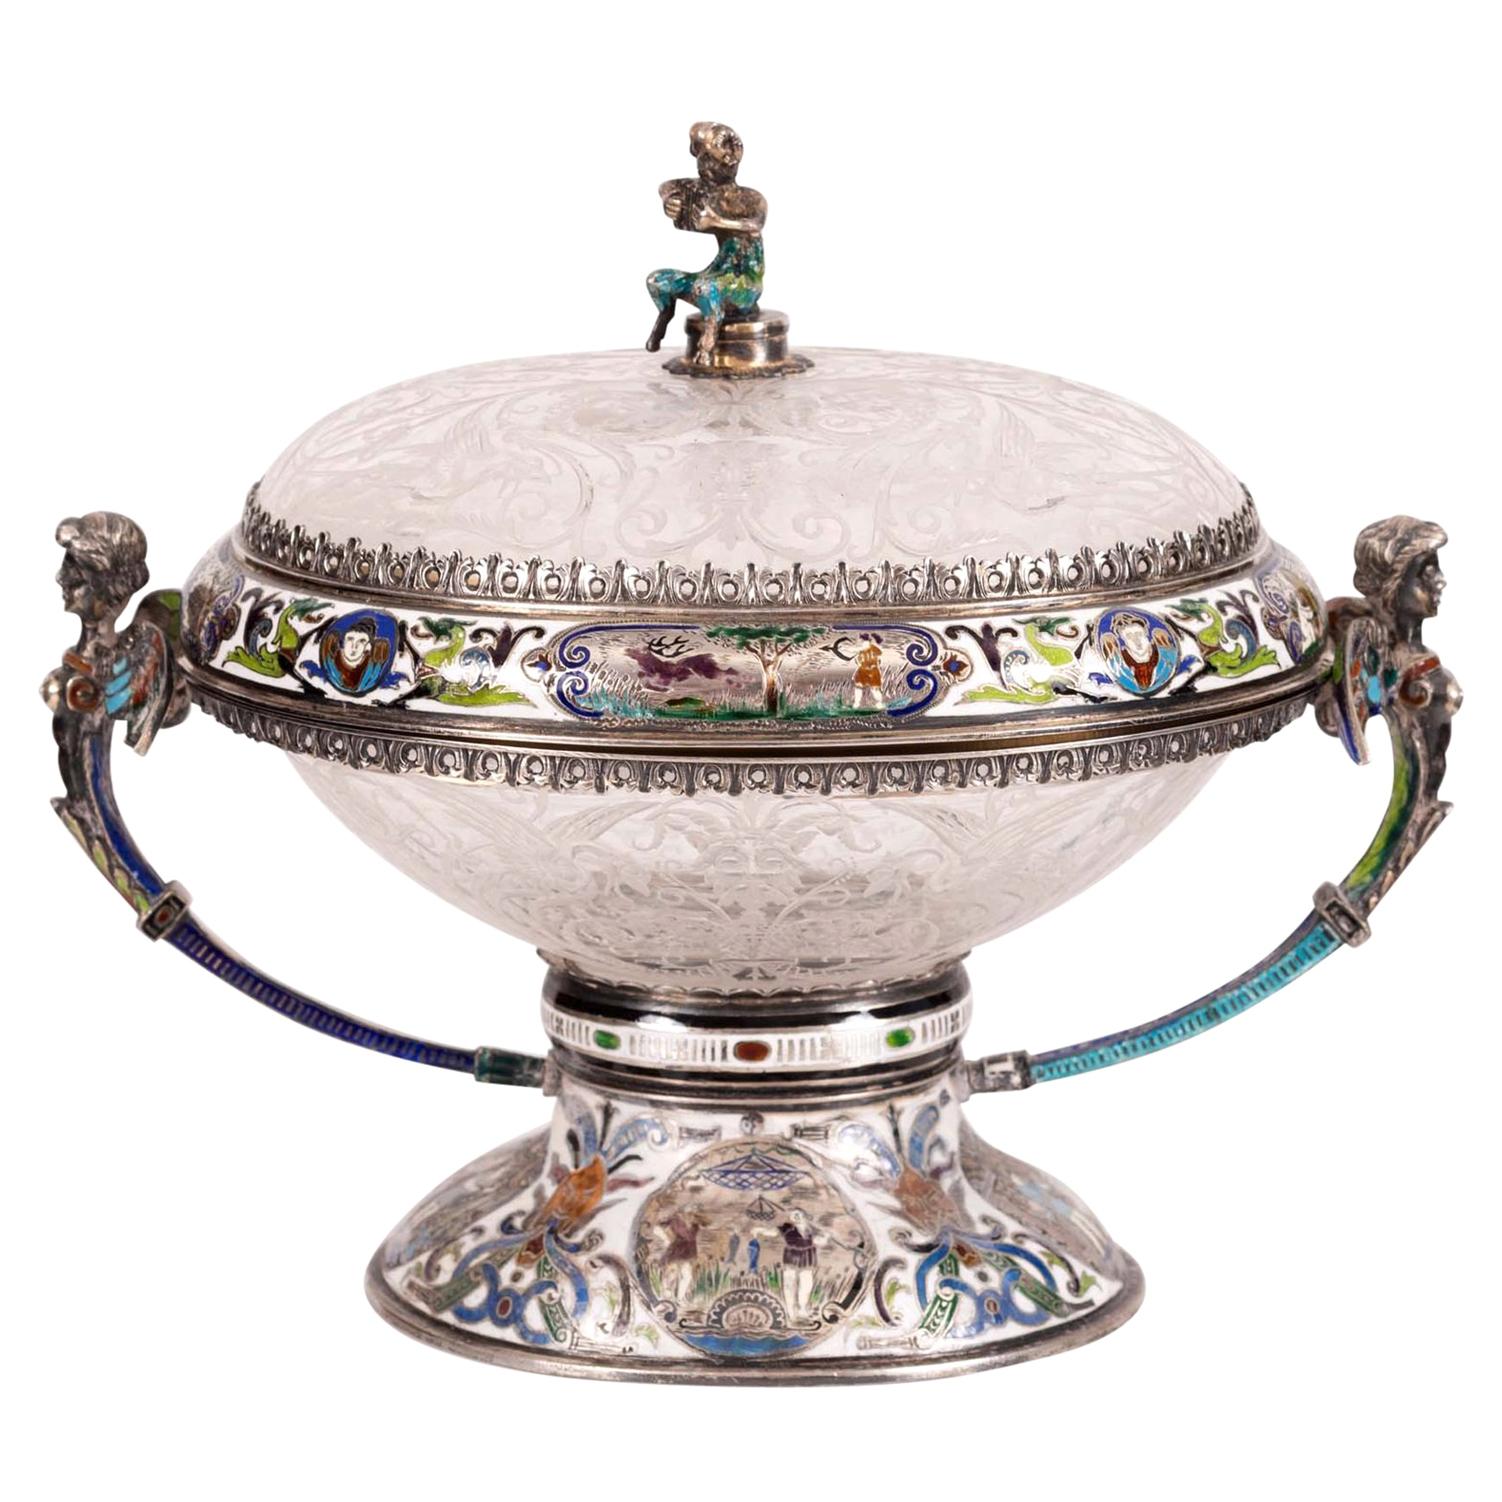 Viennese Enameled Silver and Rock Crystal Coupe and Cover by Herman Bohm